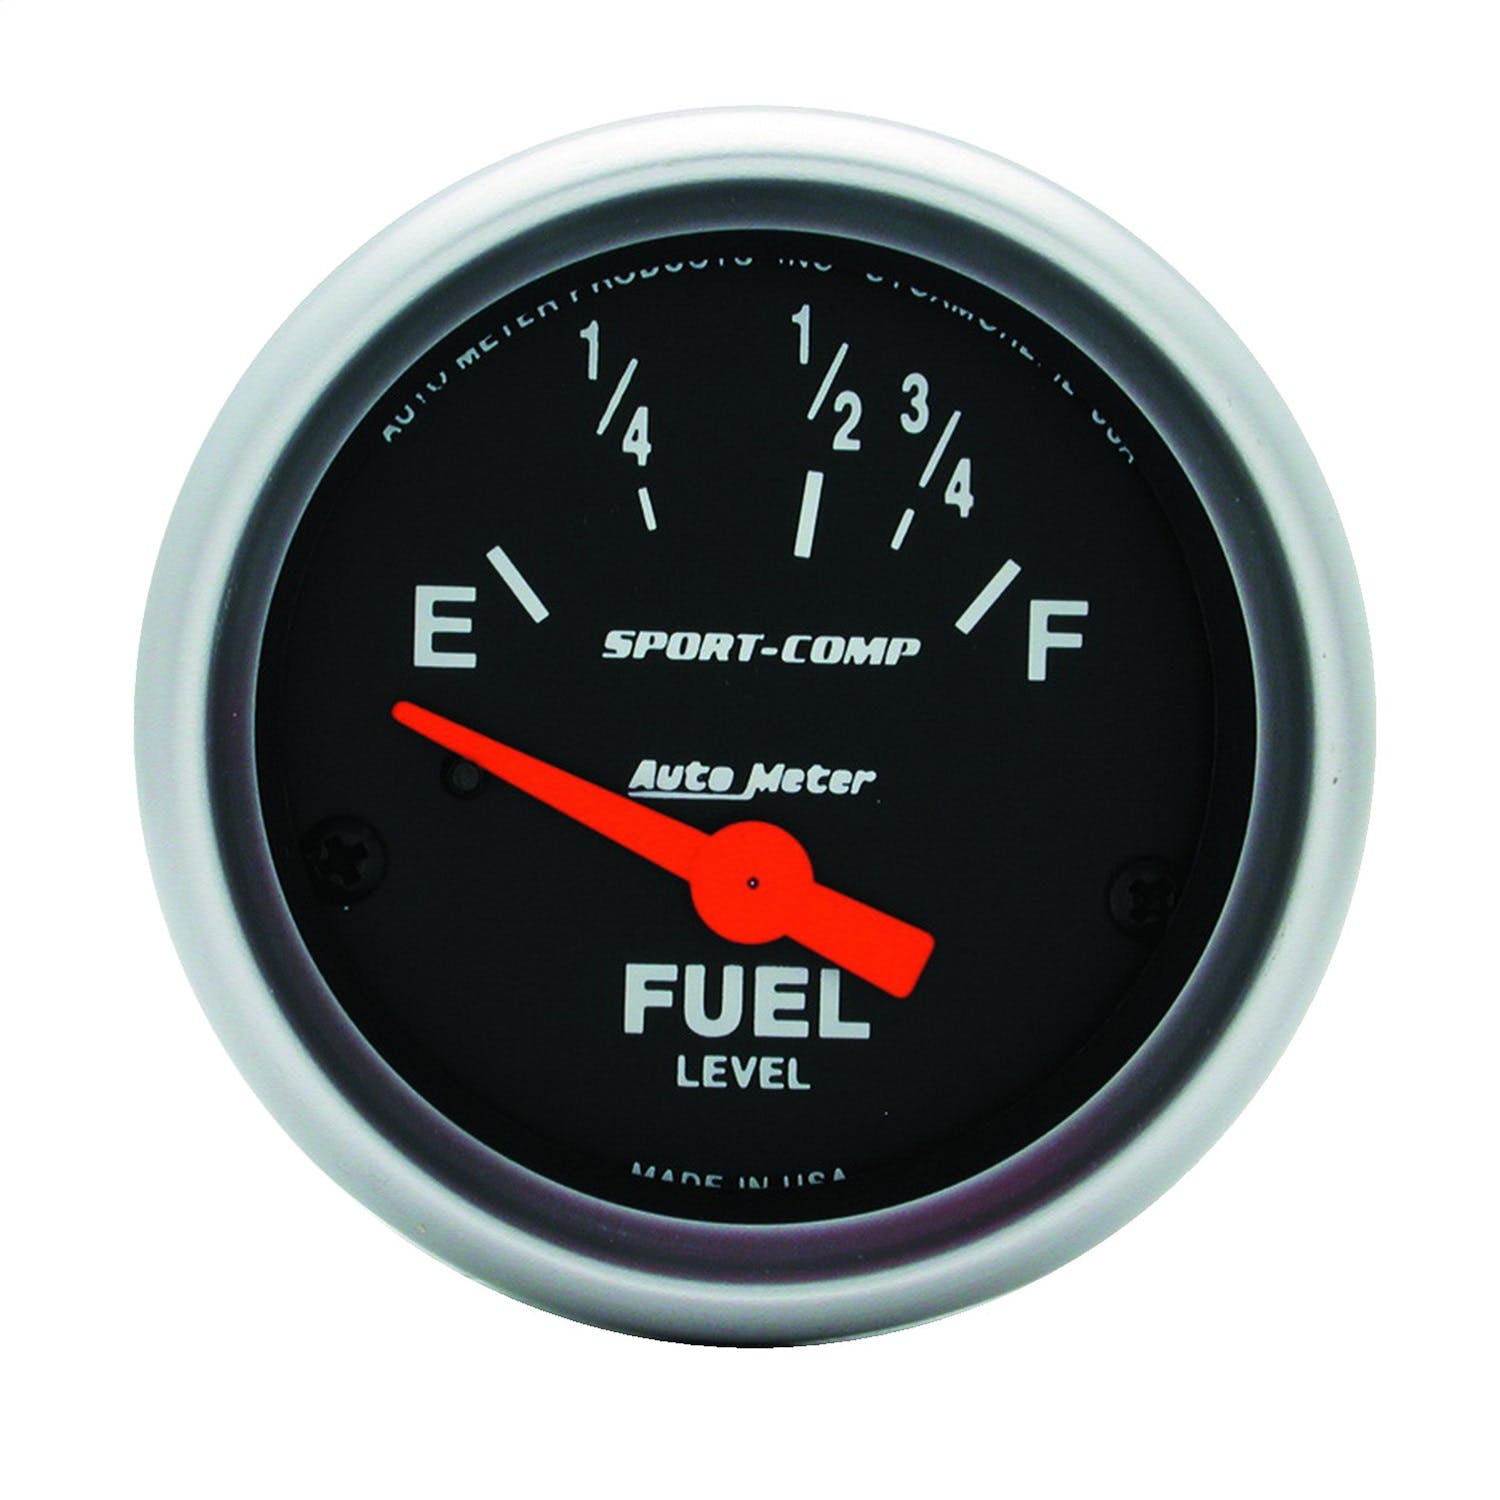 AutoMeter Products 3319 Fuel Level Gauge, 2 1/16, 73?E TO 10?F Electric Sport Comp